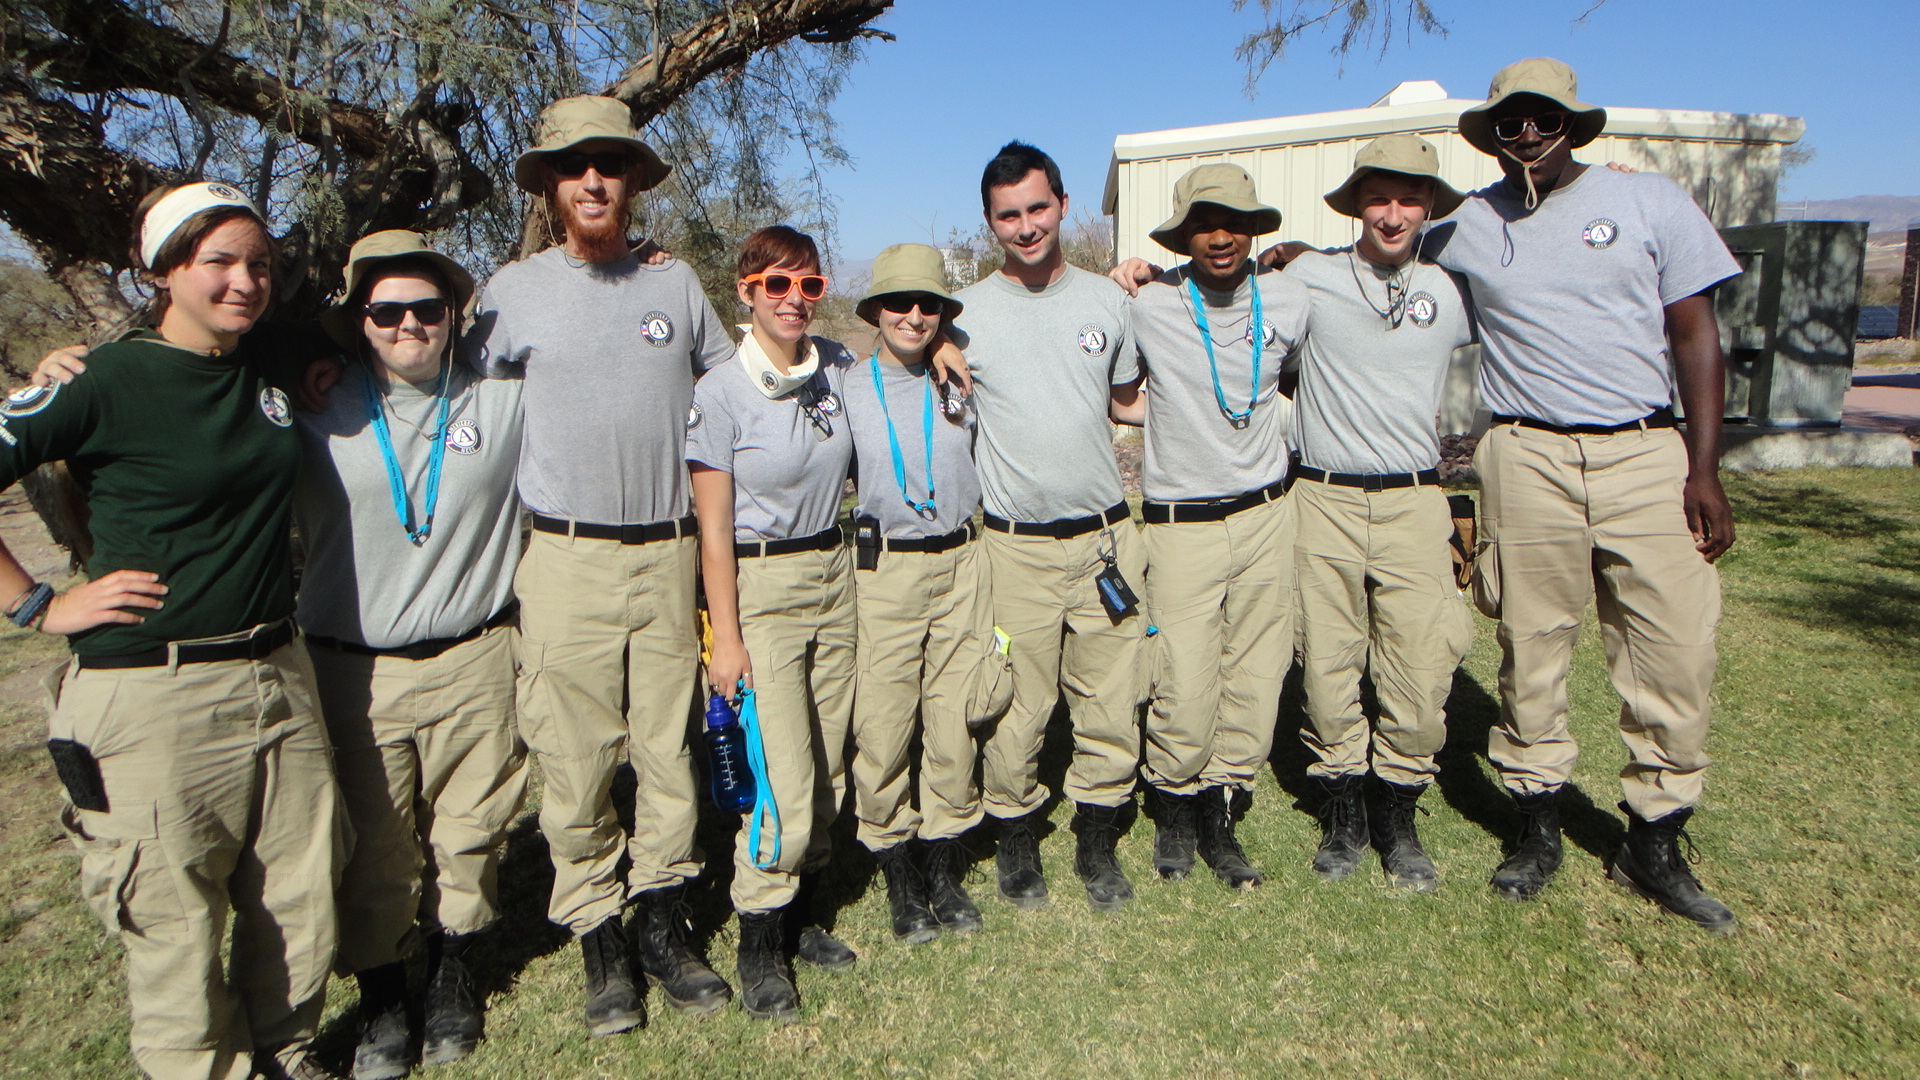 A nine-person Americorps team will provide assistance in multiple wilderness projects this fall.